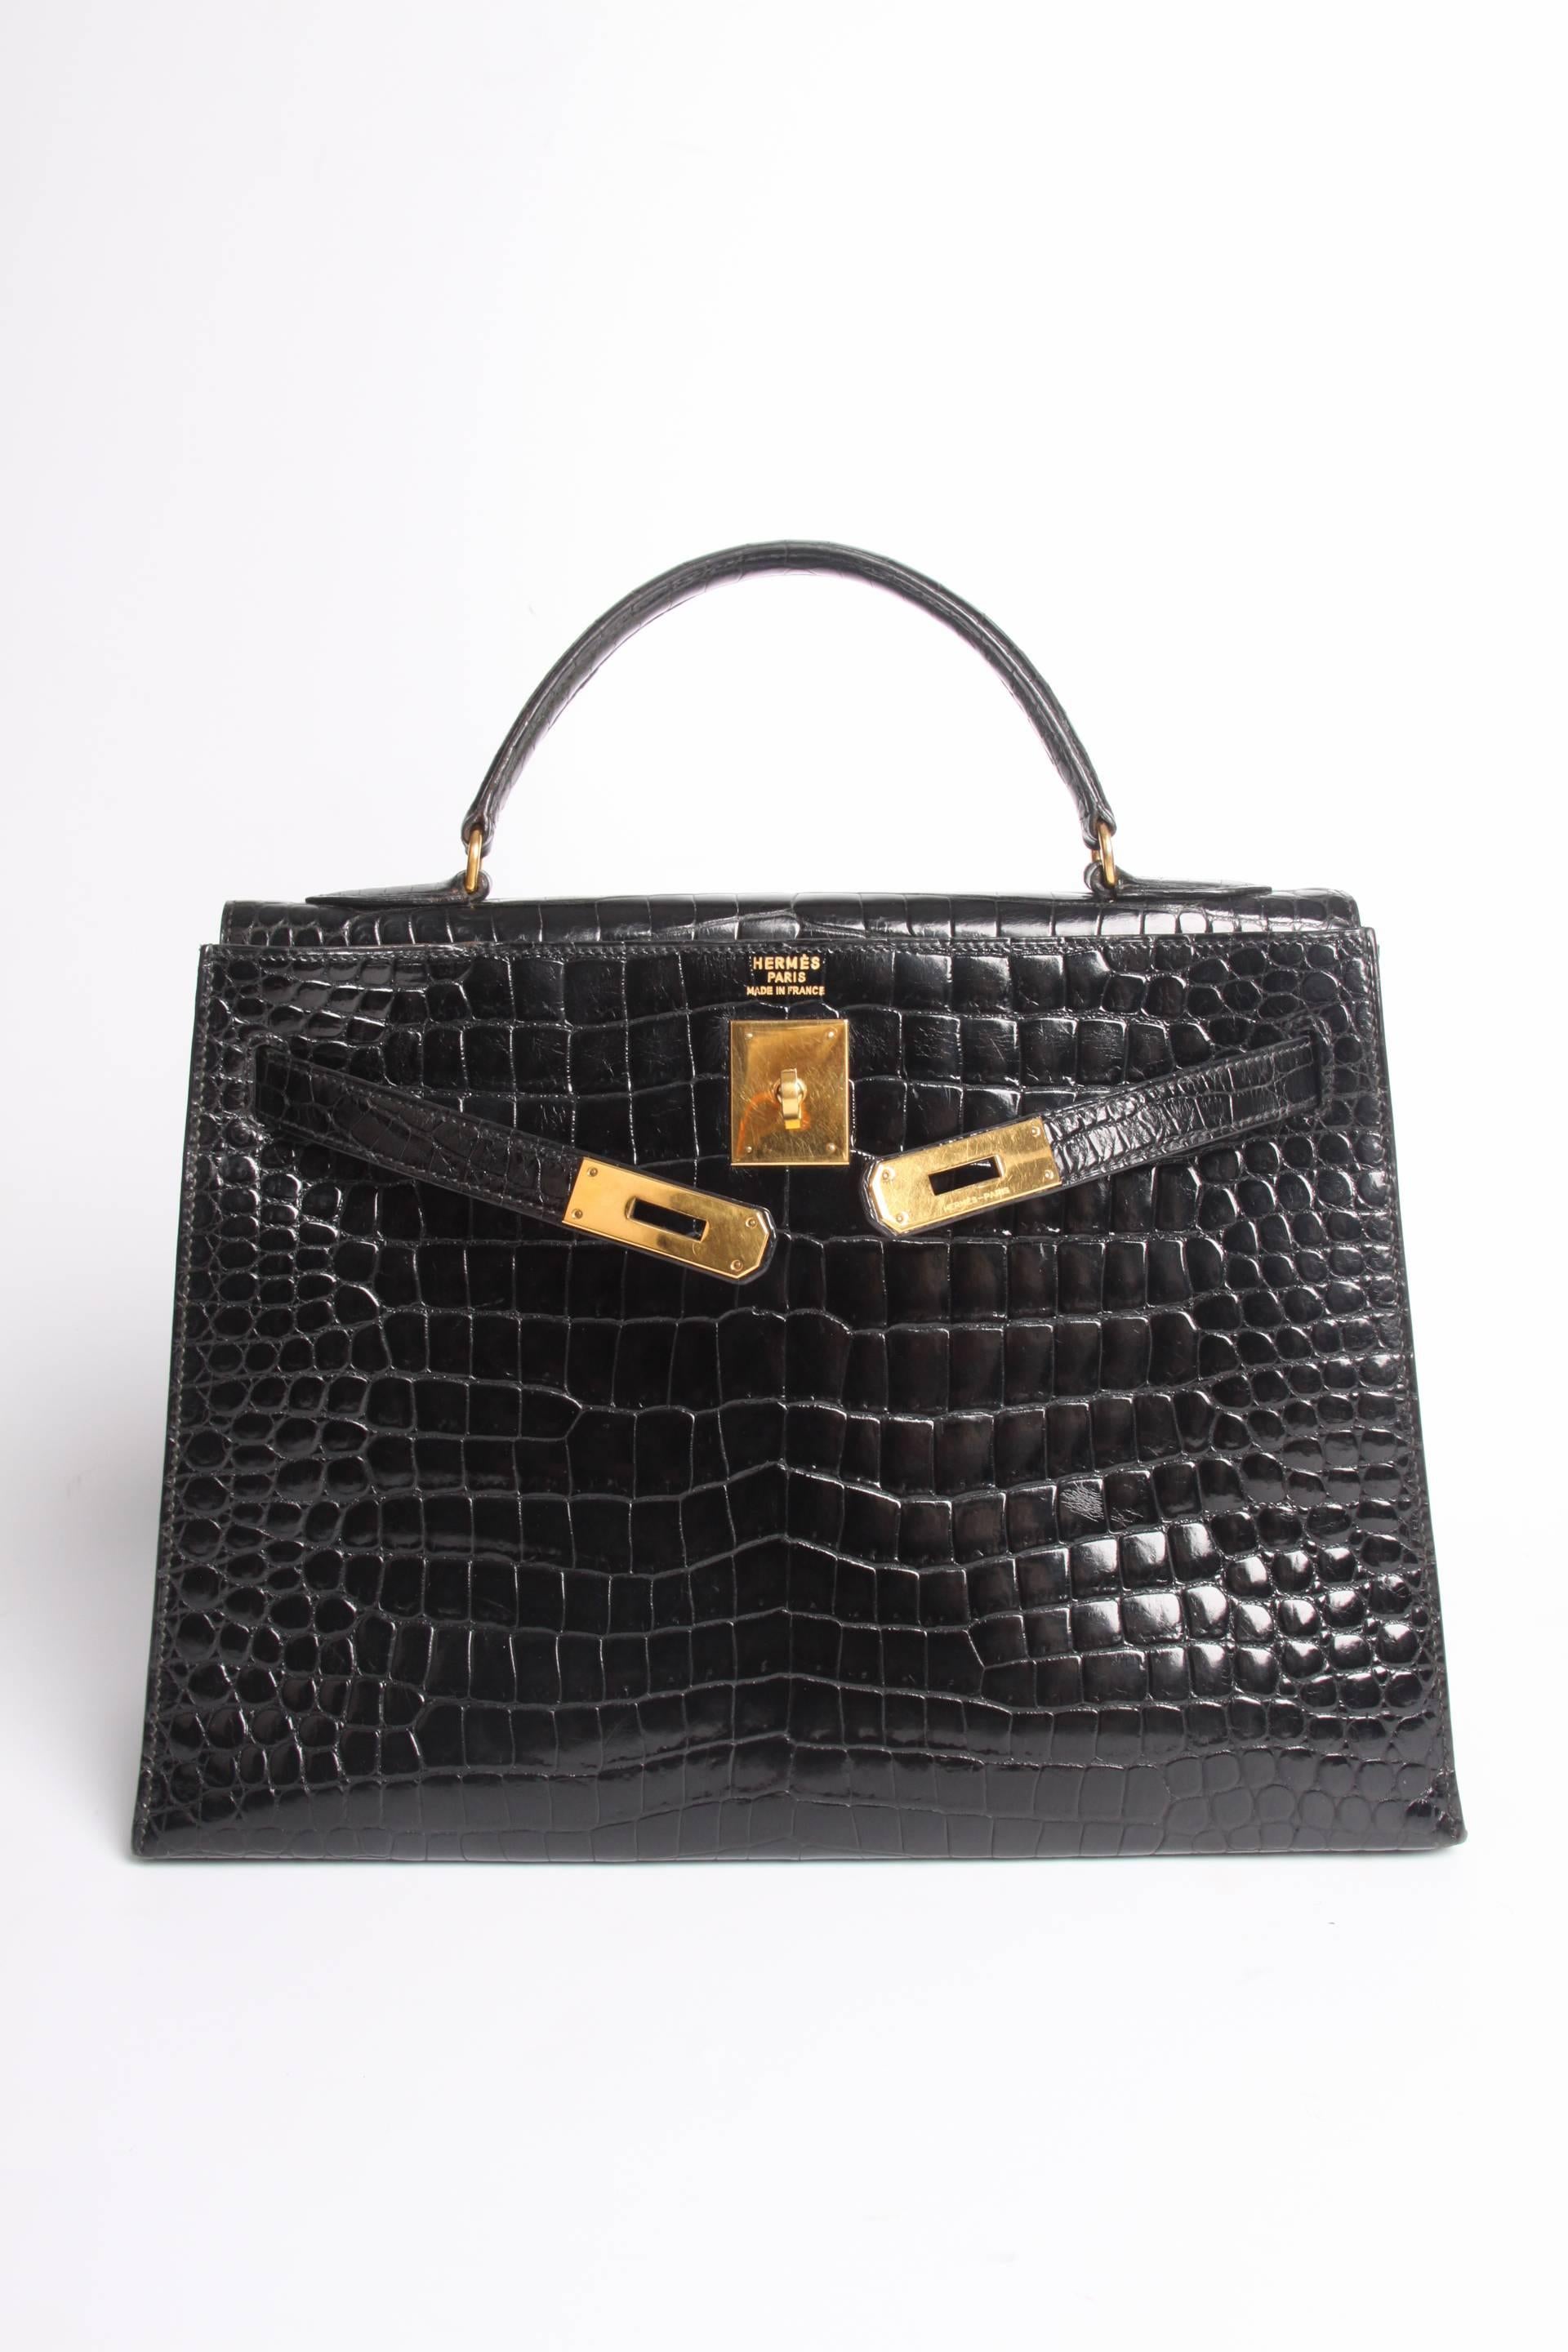 We have seen numerous Hermès Kelly Bags, but this one is quite exquisit! A 1945 beauty made of black crocodile leather. An authentic collector's item and very very rare!

Every bag is handcrafted in France and has numerous characteristics.